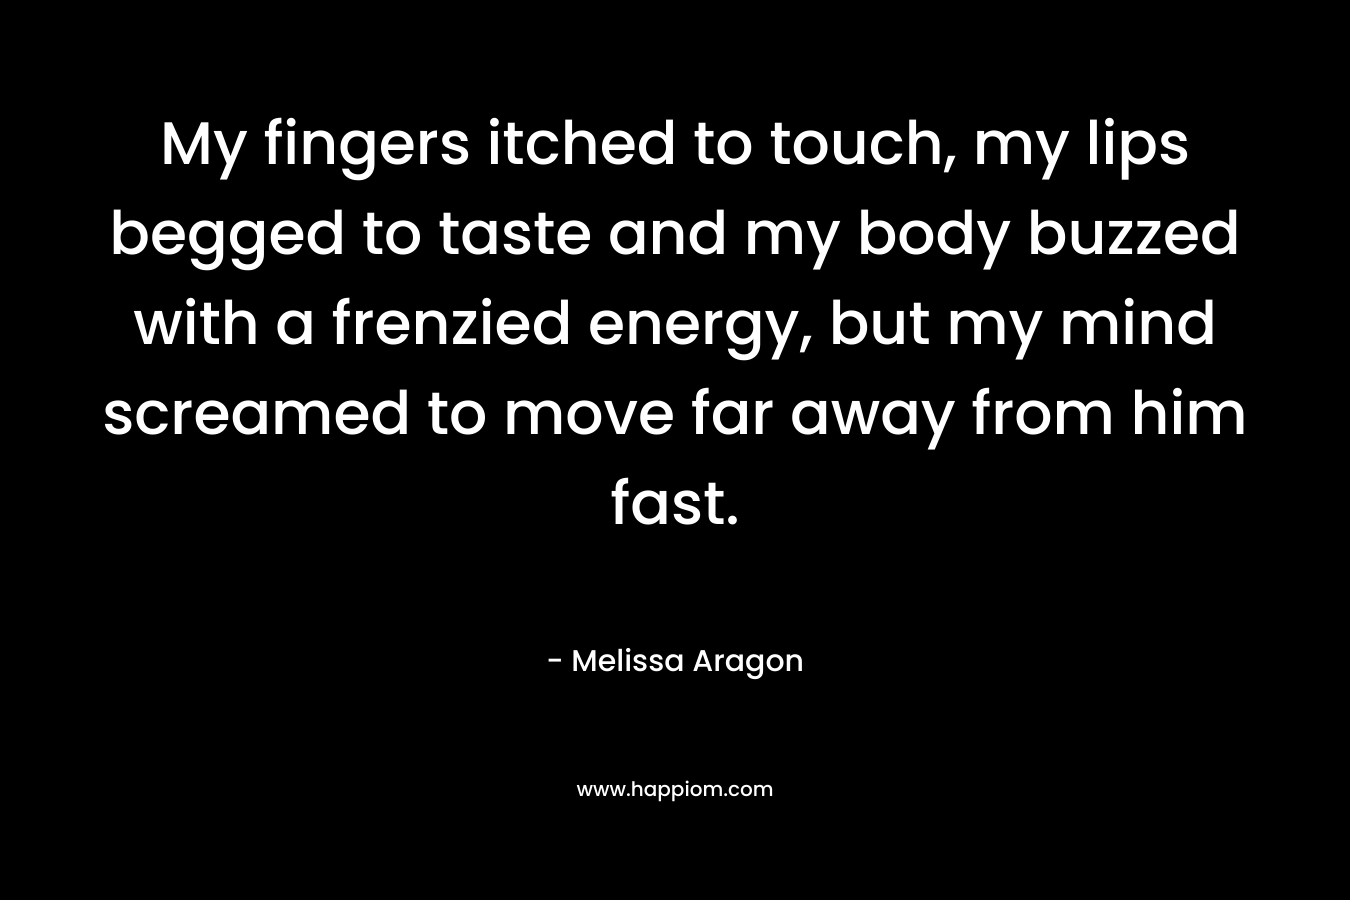 My fingers itched to touch, my lips begged to taste and my body buzzed with a frenzied energy, but my mind screamed to move far away from him fast. – Melissa Aragon